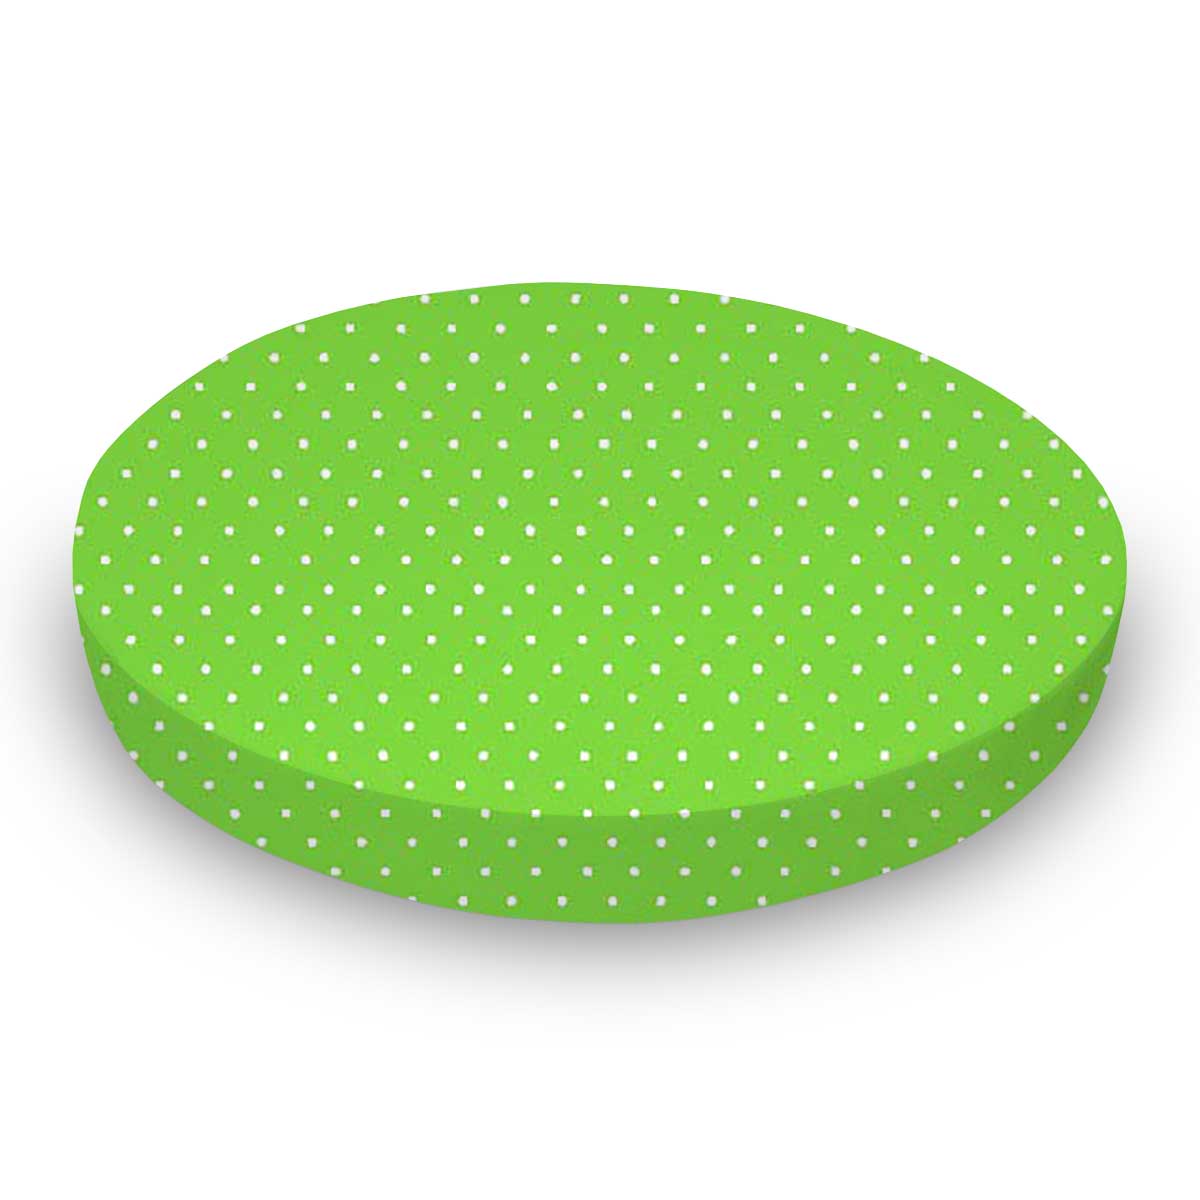 Round Crib - Primary Pindots Green Woven - 42`` Fitted